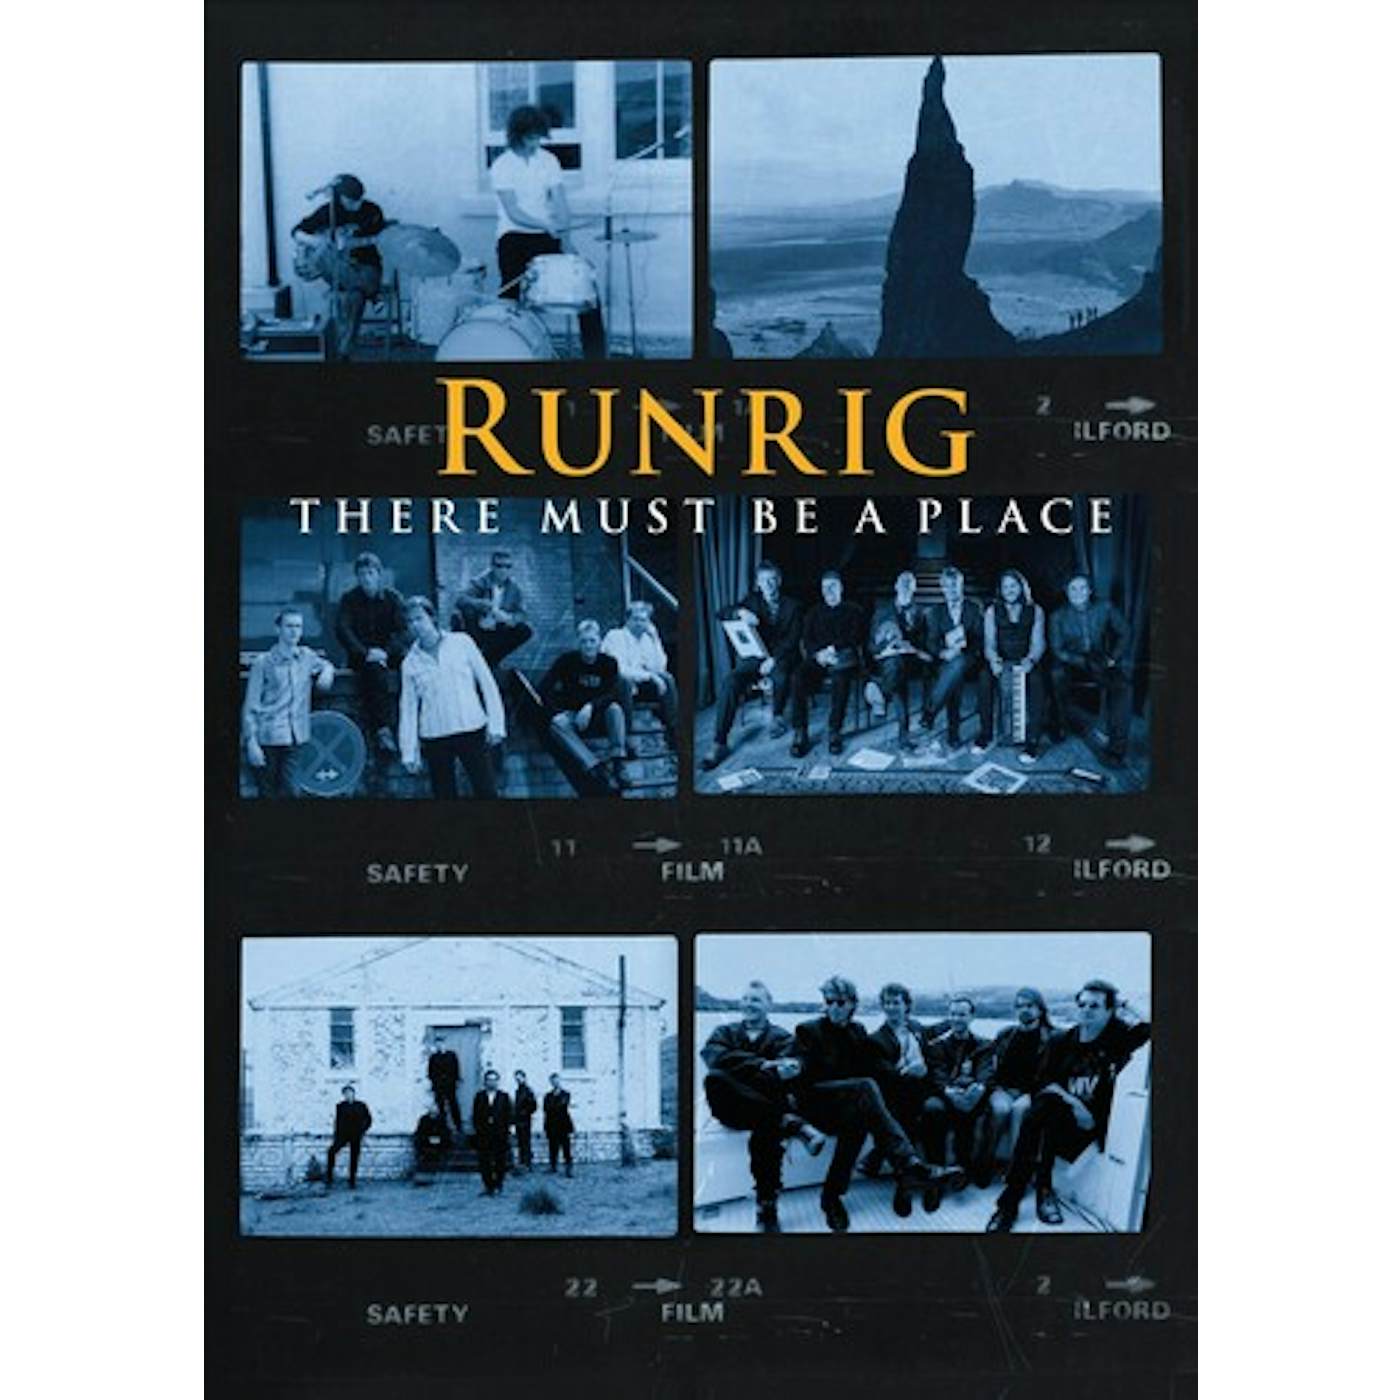 Runrig THERE MUST BE A PLACE Blu-ray